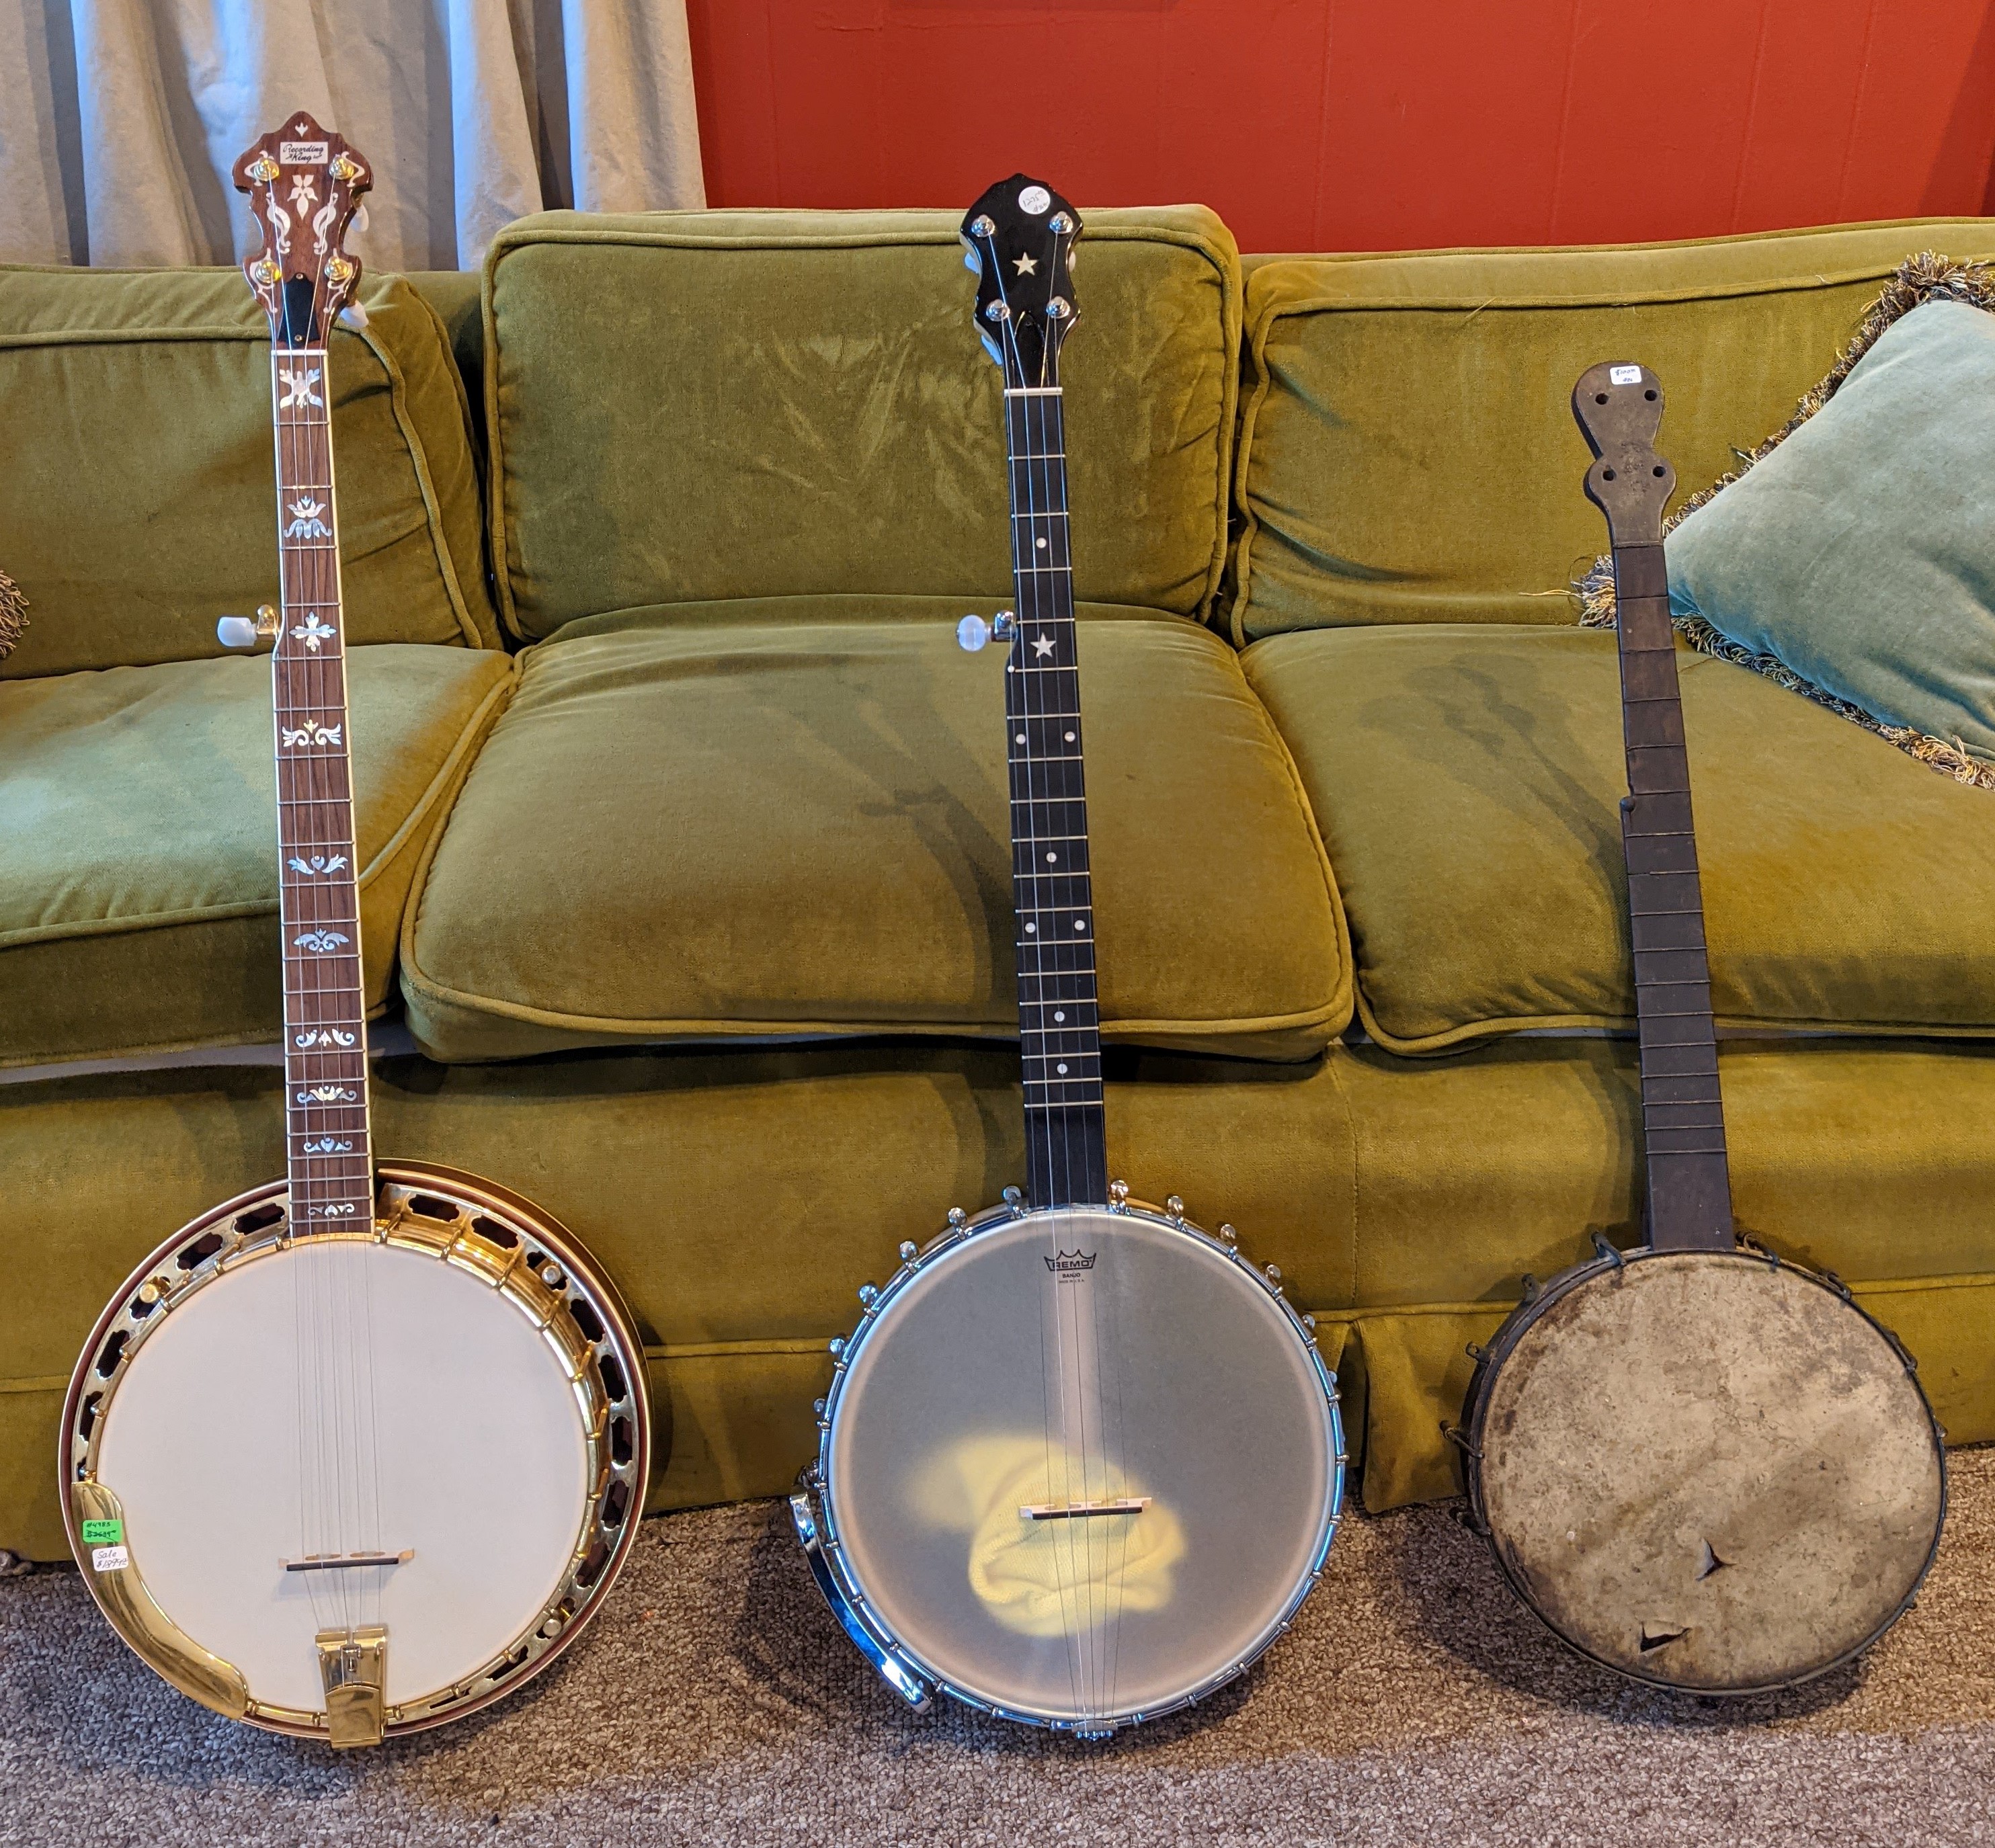 History of Banjo - Georgia Pick and Bow Traditional Music School